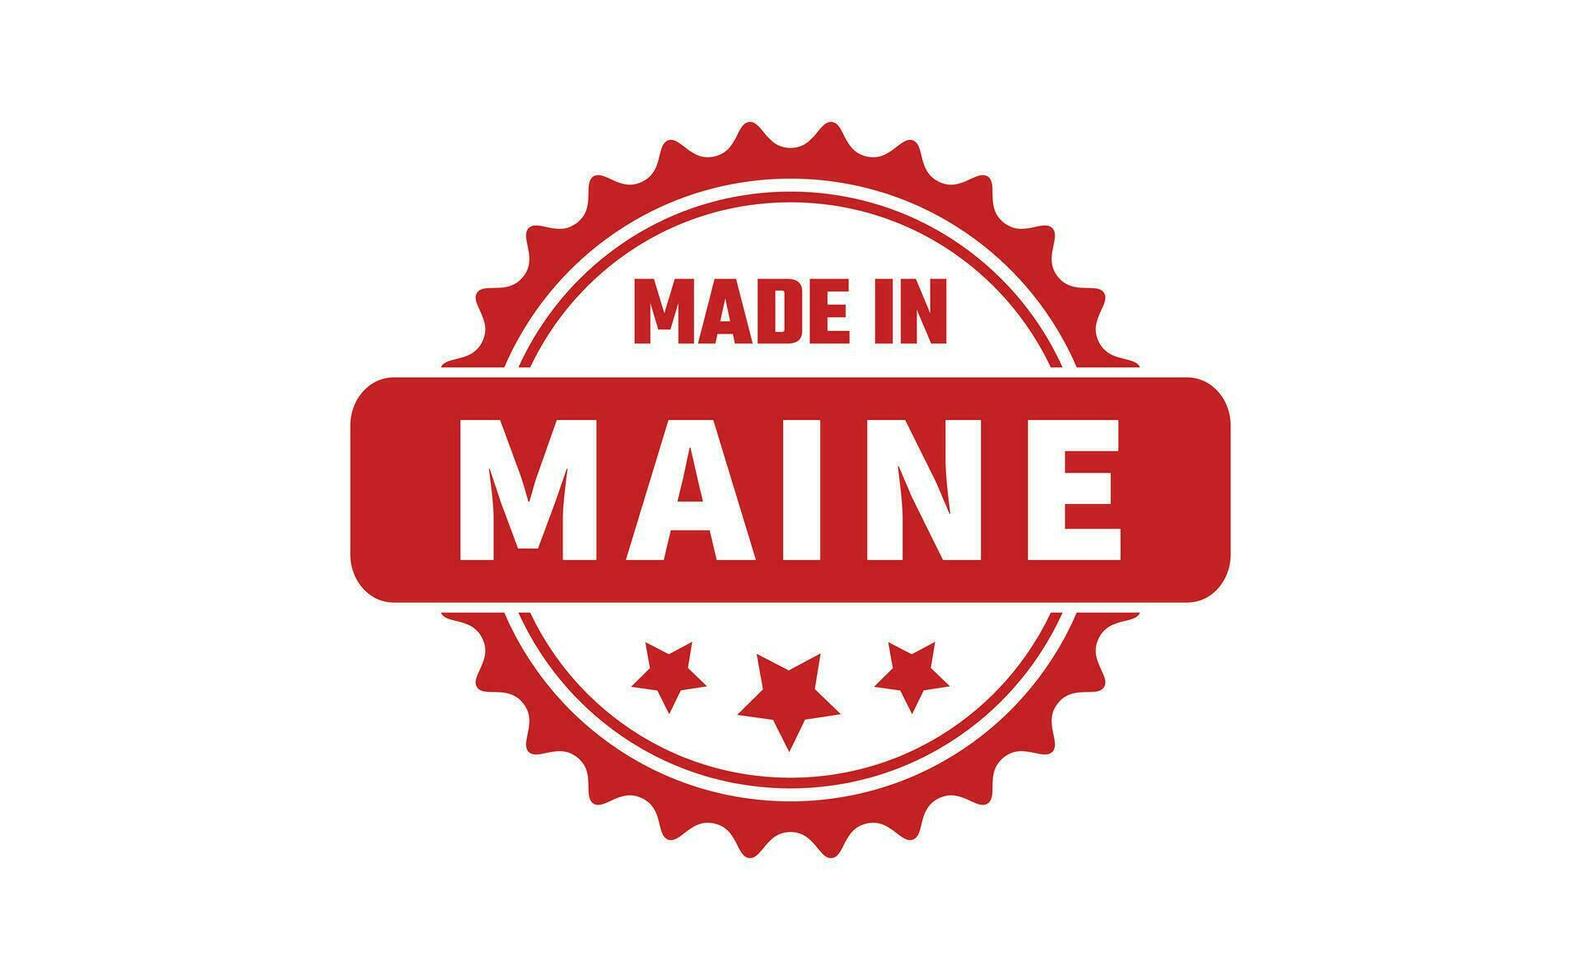 Made In Maine Rubber Stamp vector